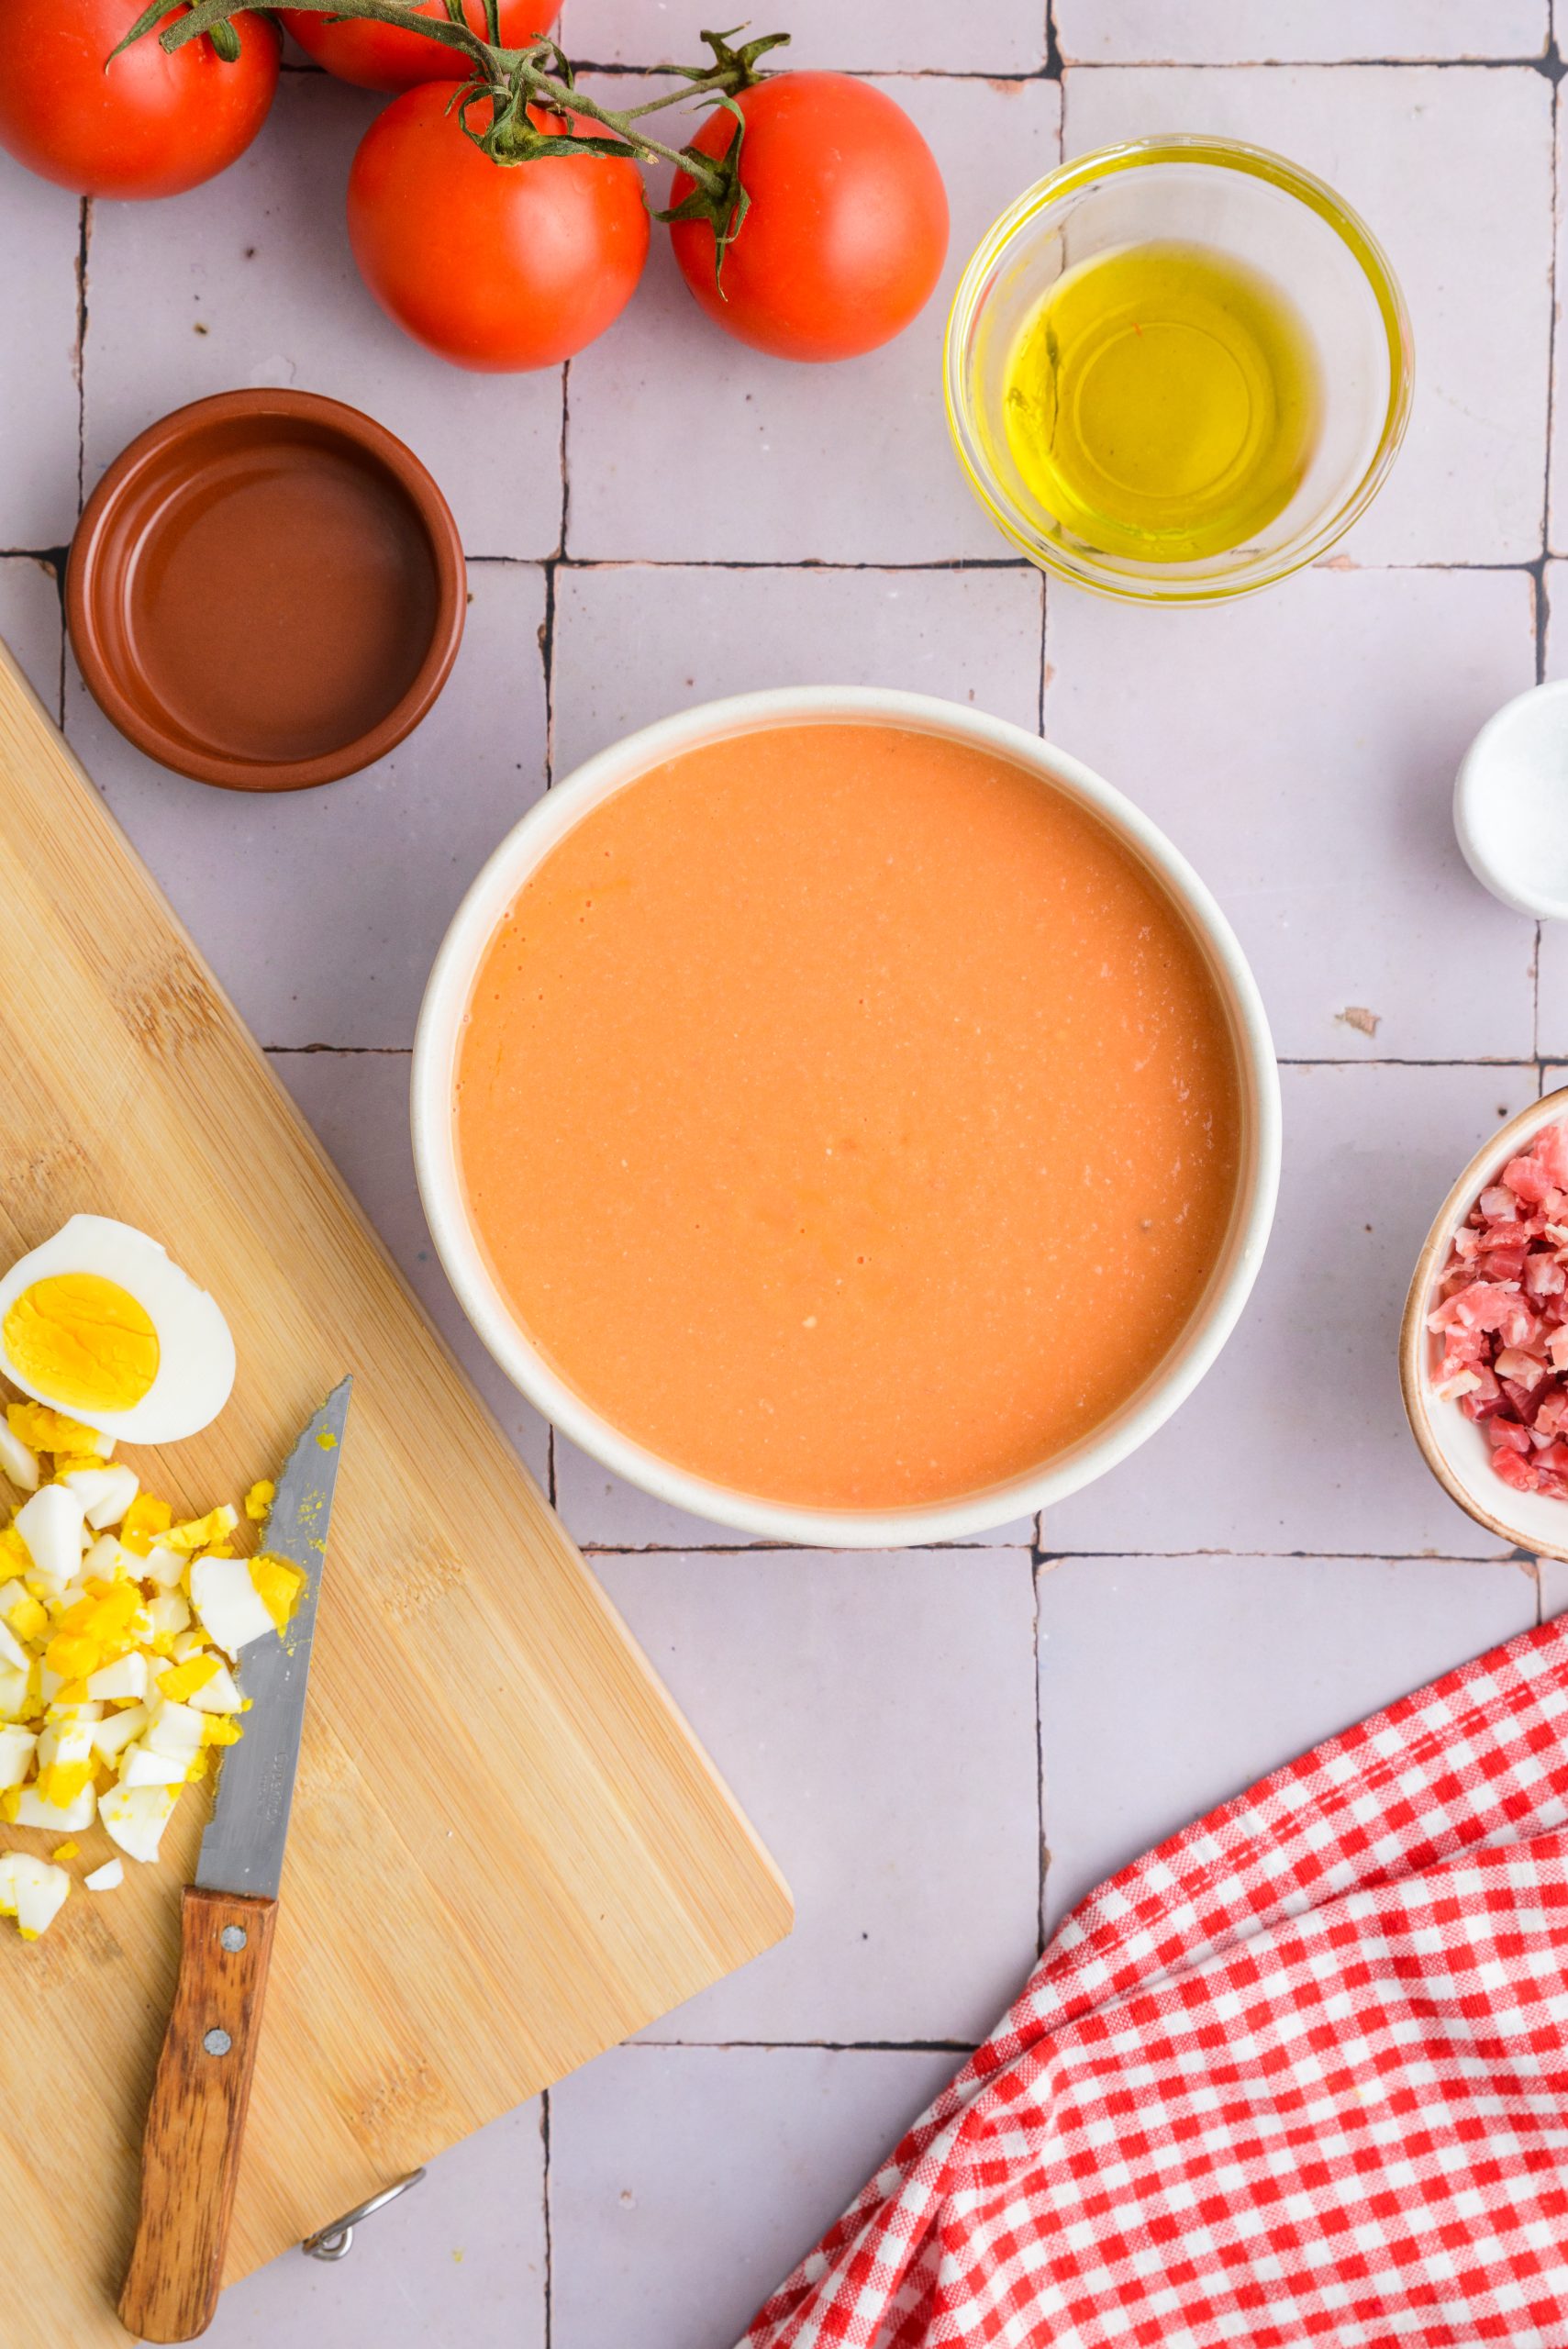 Salmorejo recipe: Transfer the mixture to a bowl and refrigerate